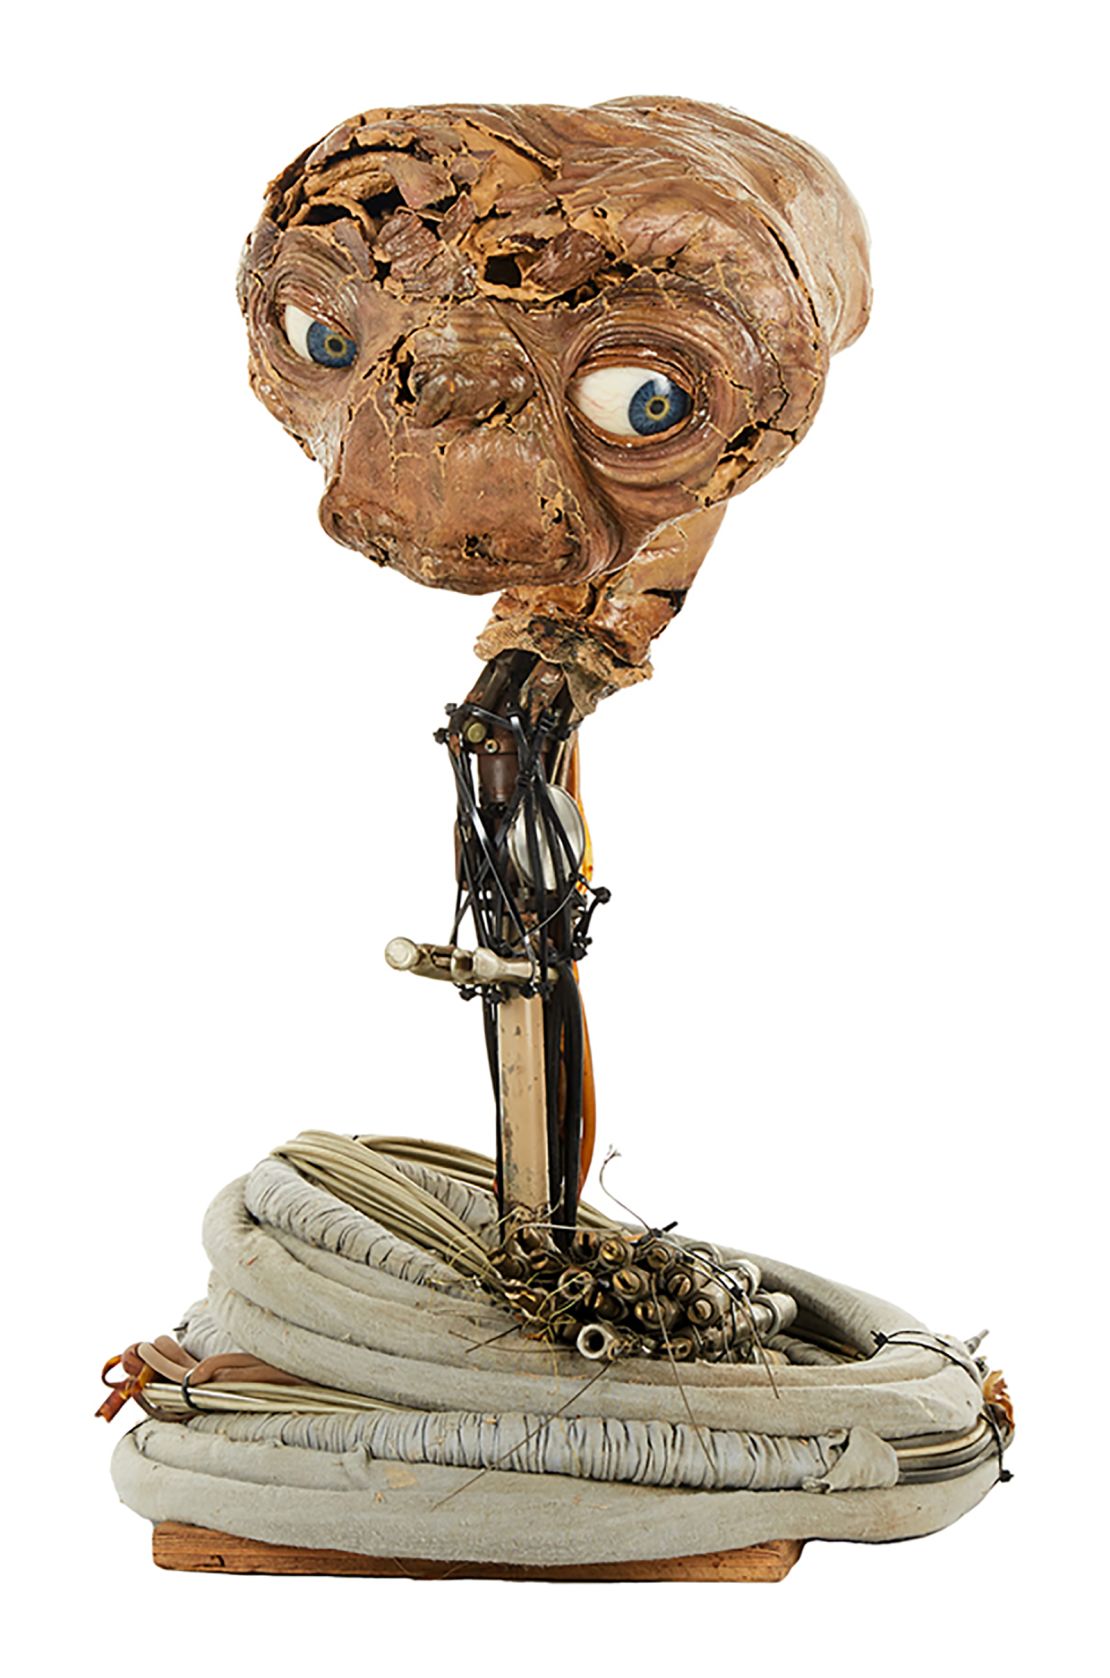 The most iconic and beloved alien of all time will be at the center of this celebration with the offering of an original hero mechanical animatronic E.T. head (Estimate: $800,000 - $1,000,000) created by the legendary Carlo Rambaldi and as seen throughout Steven Spielberg's, E.T. The Extra Terrestrial. TCM and Julien's previously sold a full E.T. animatronic model for over $2.5 million dollars.